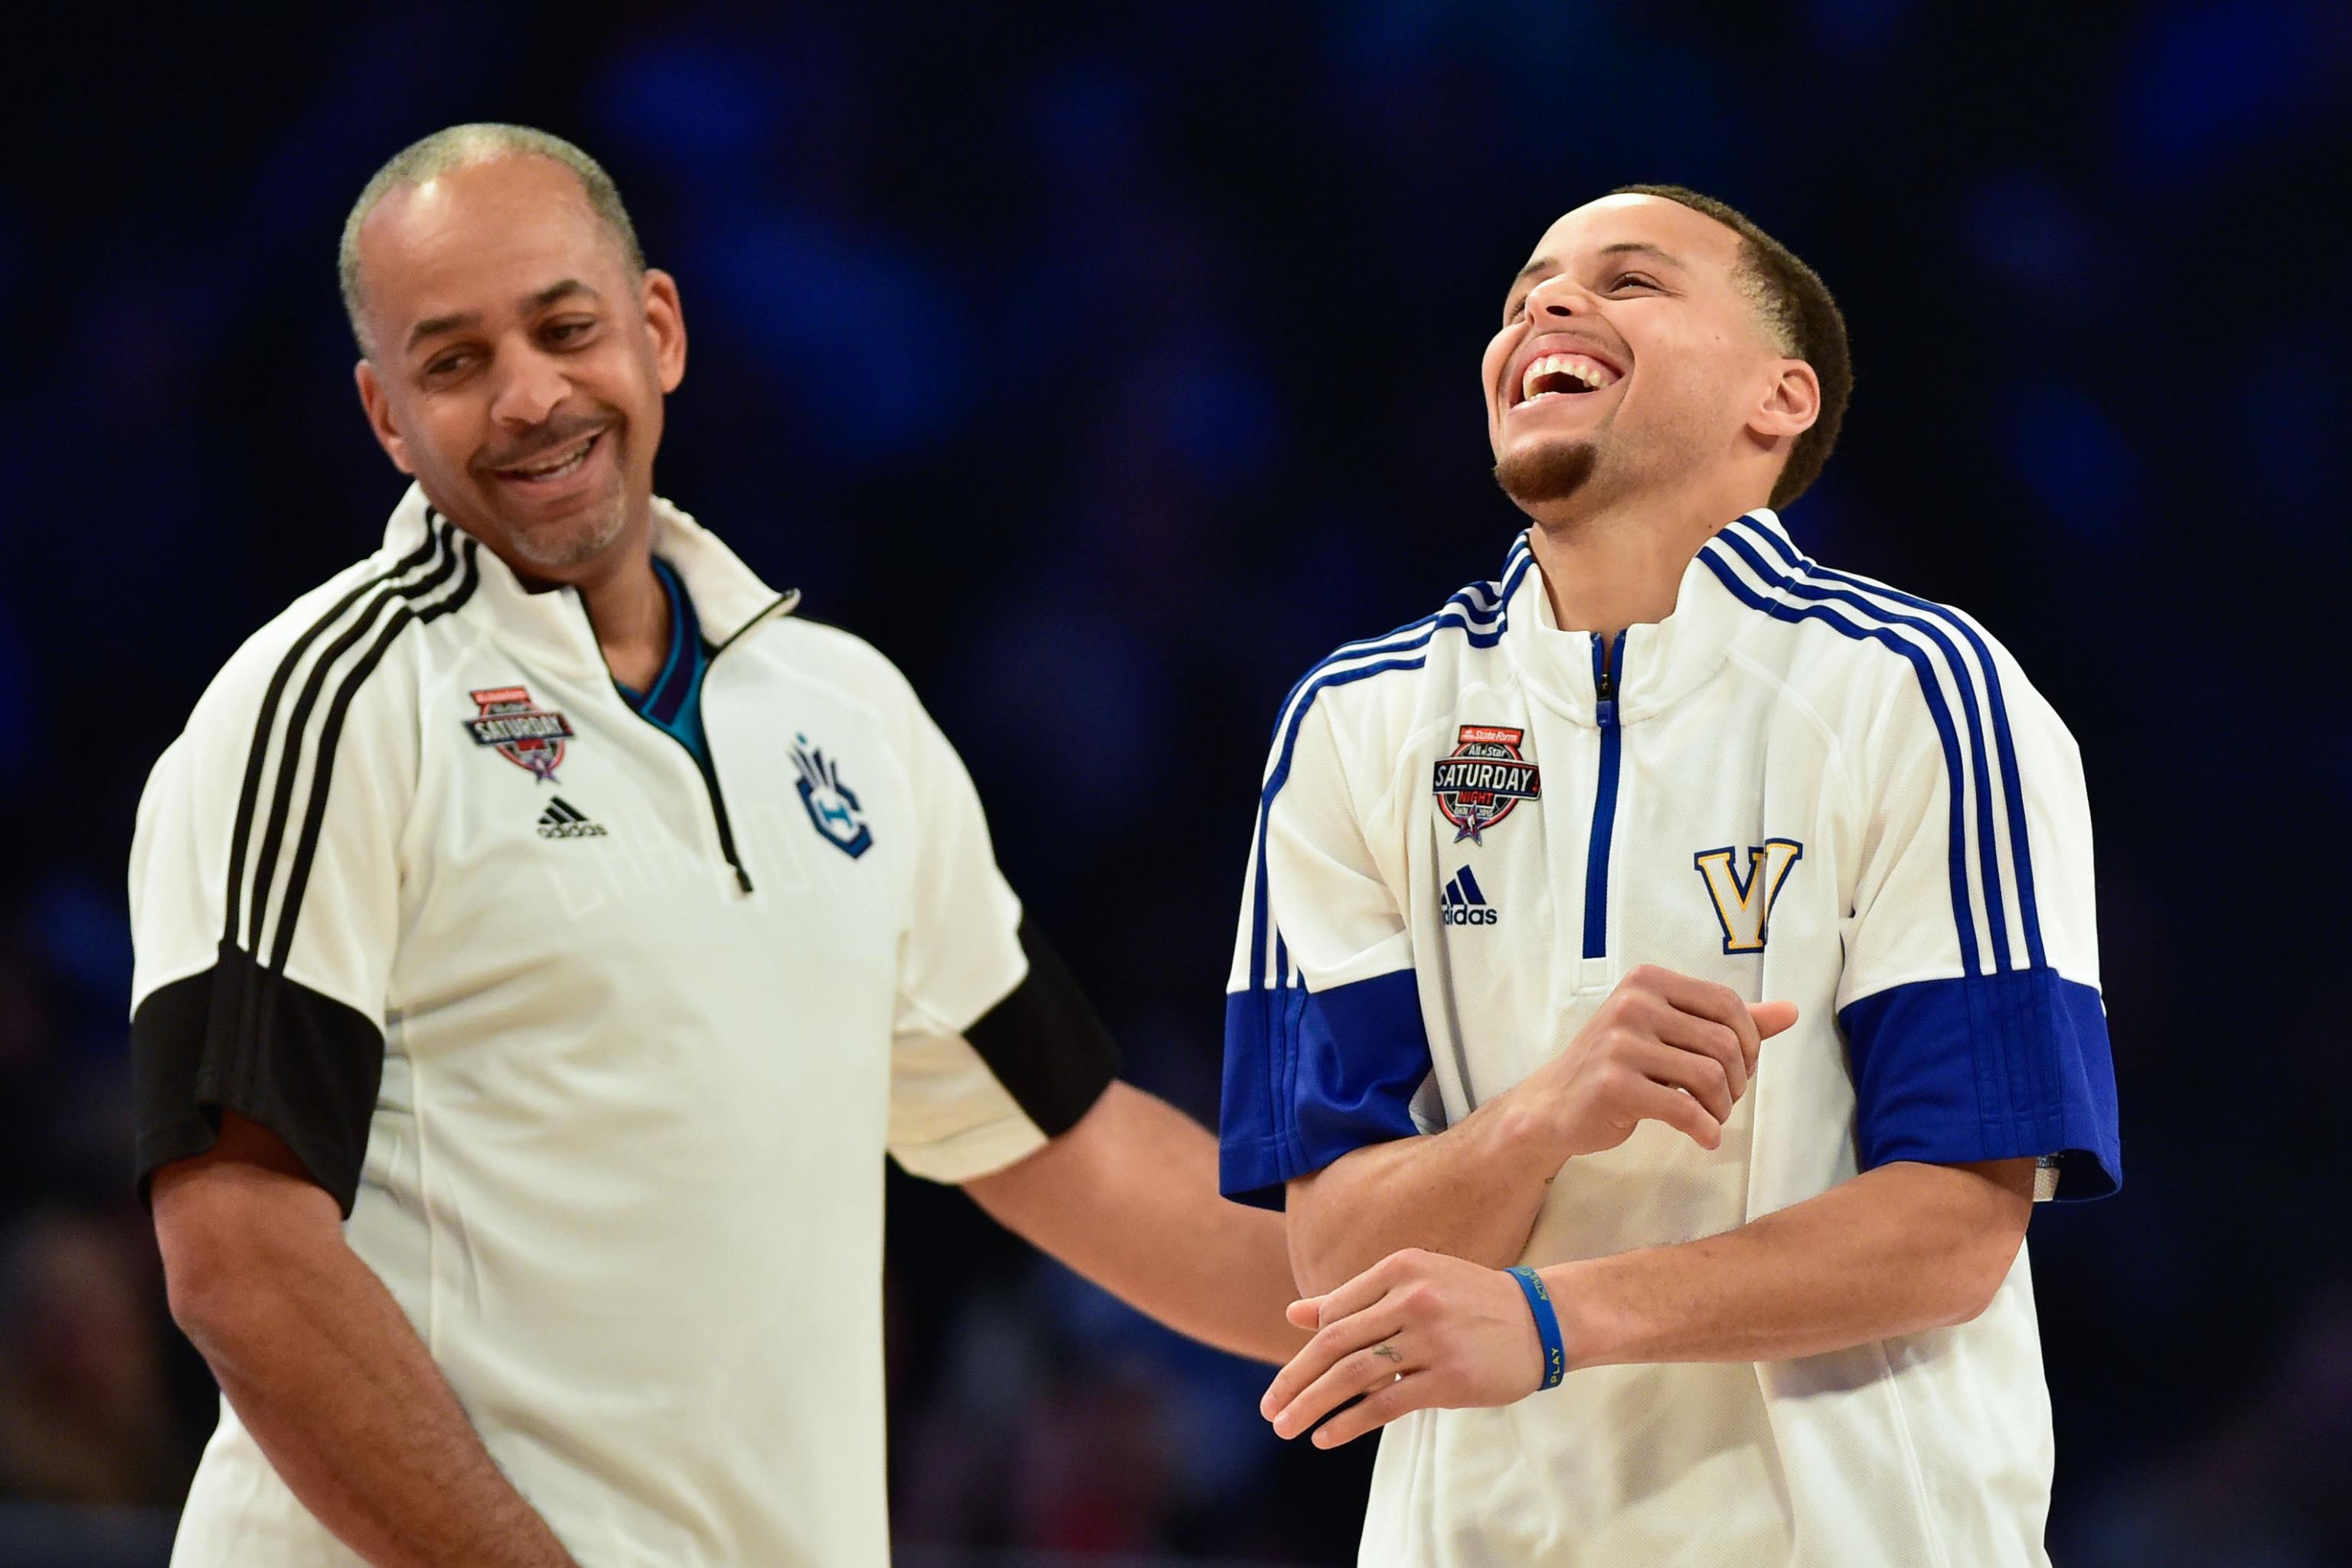 Warriors All-Star Rewind: Steph Curry wins 2015 3-point contest